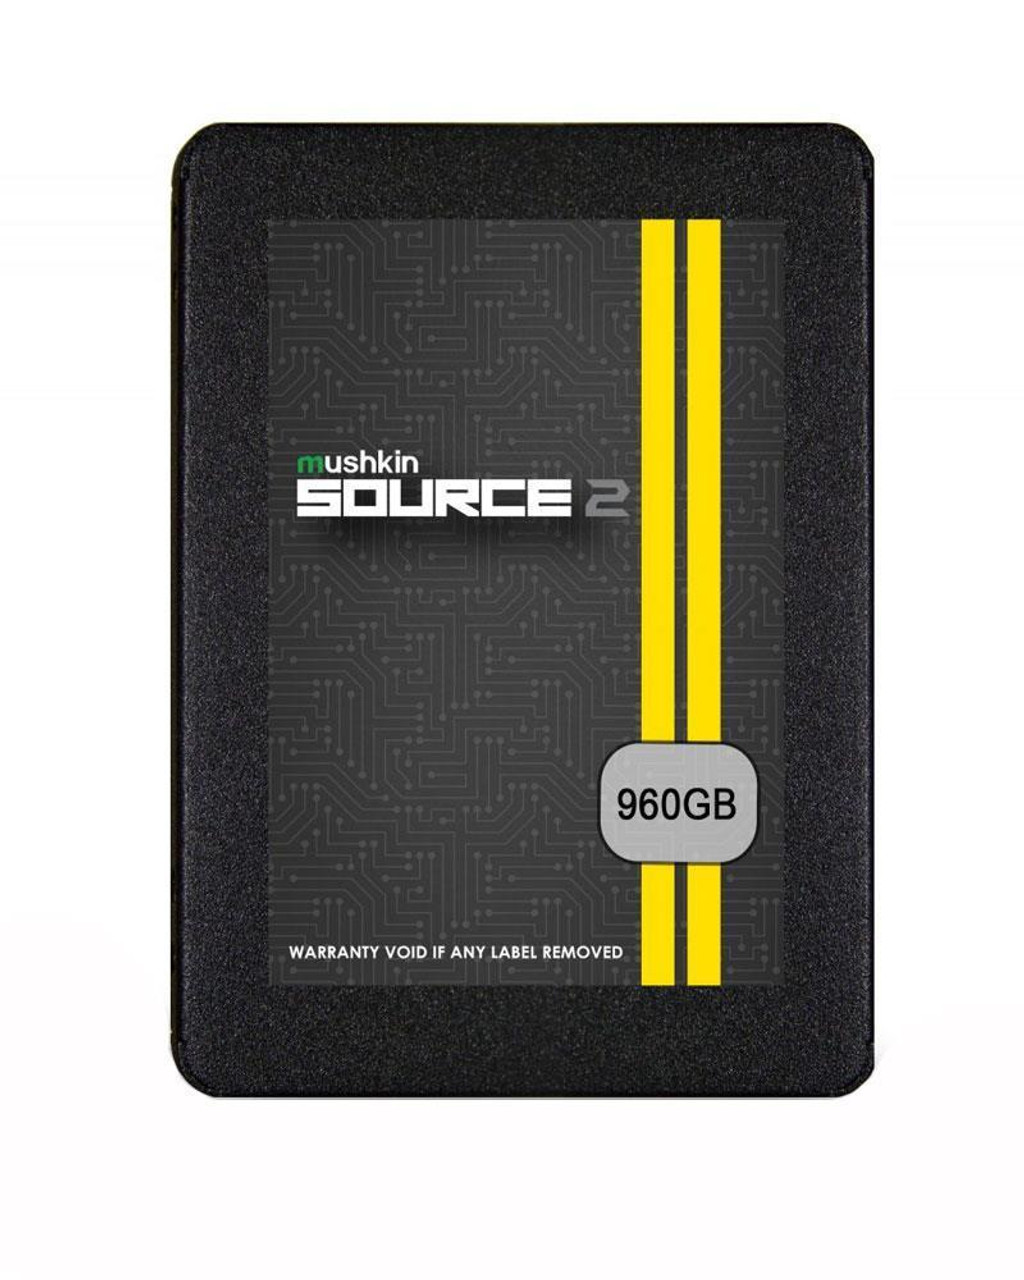 Mushkin Source 2 Deluxe 2TB SATA 6Gbps 2.5-inch Internal Solid State Drive (SSD)